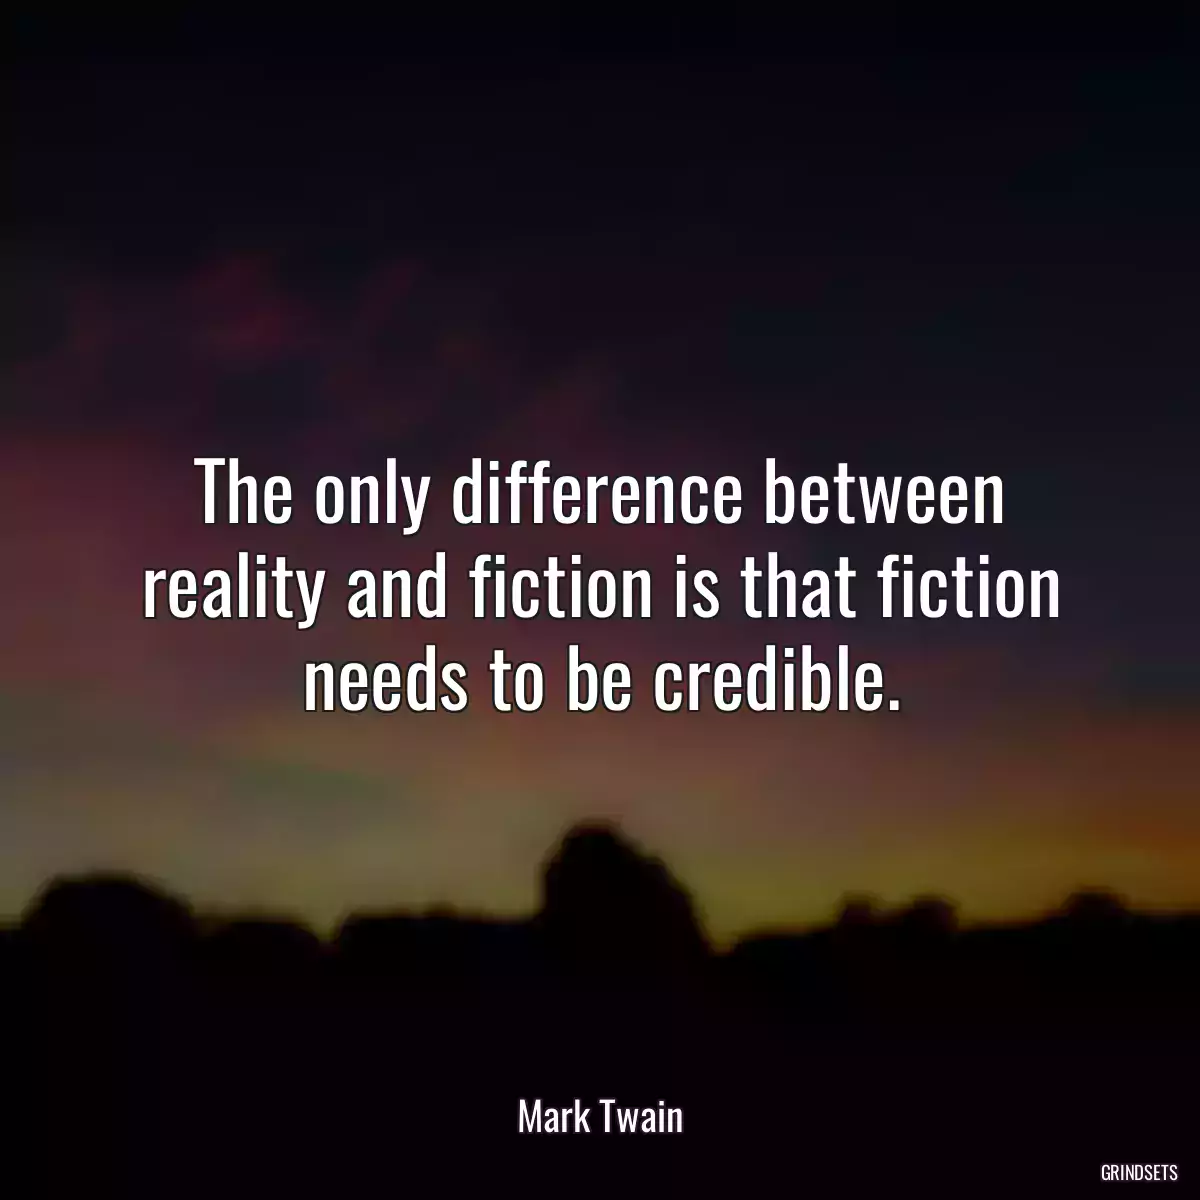 The only difference between reality and fiction is that fiction needs to be credible.